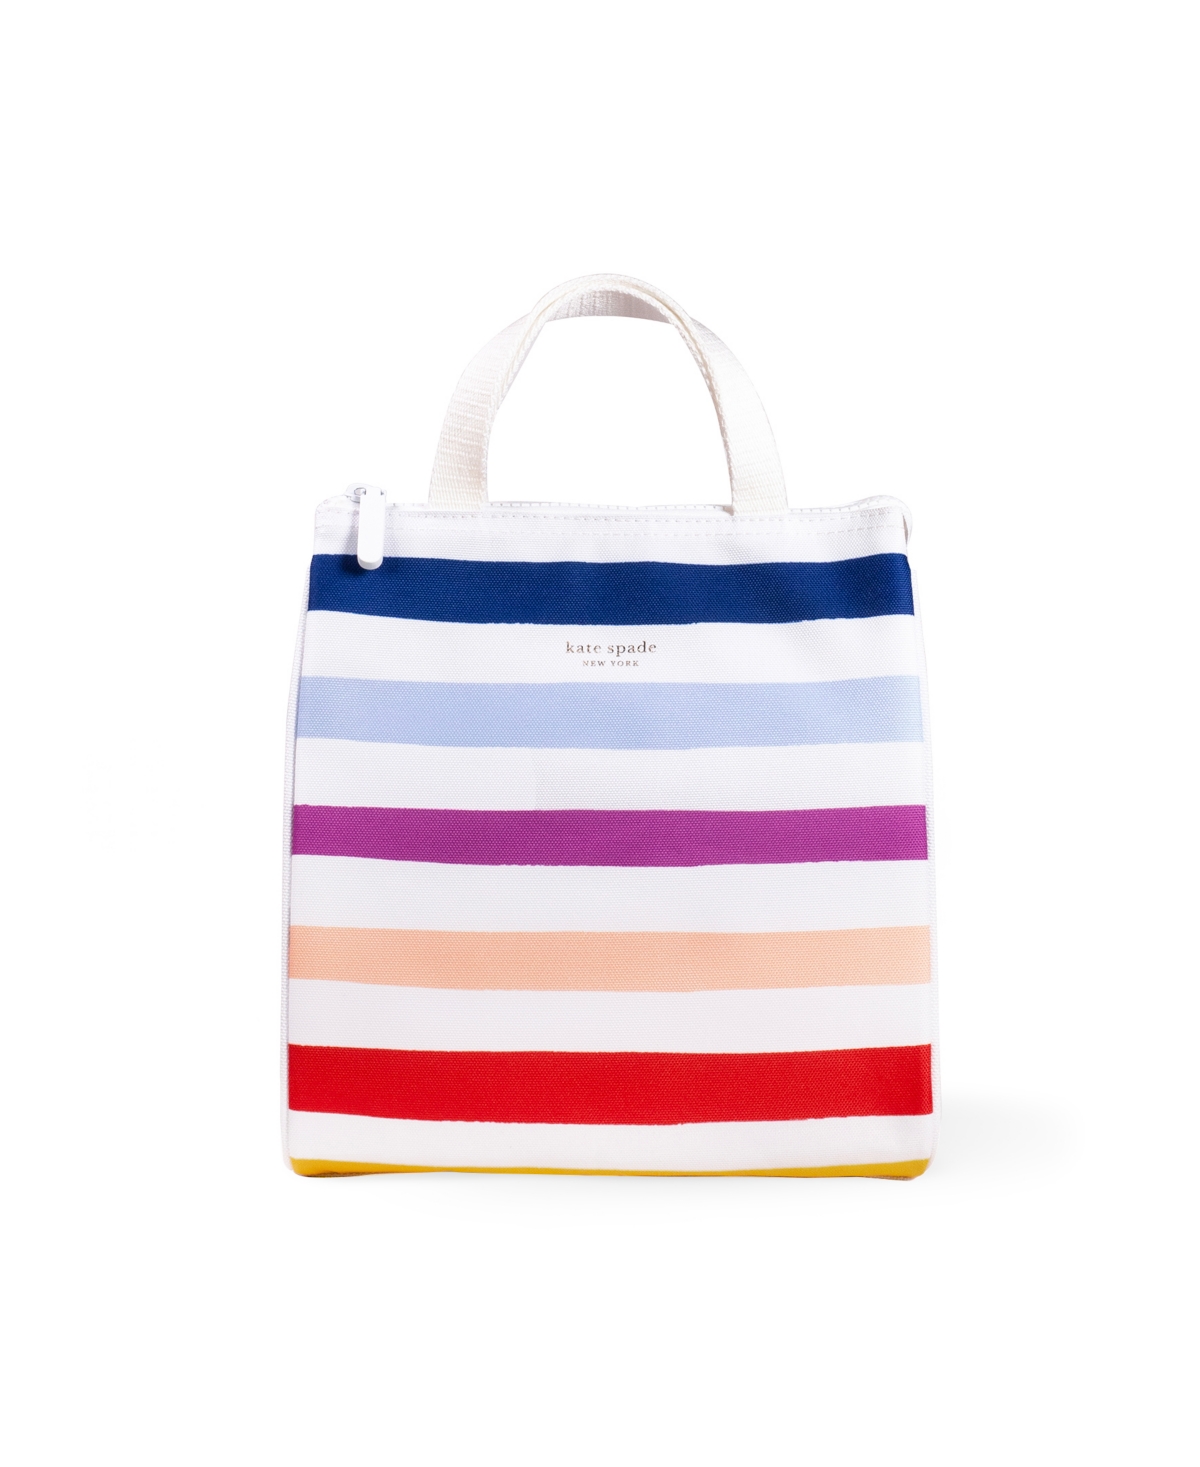 Kate Spade Lunch Bag In Candy Stripe